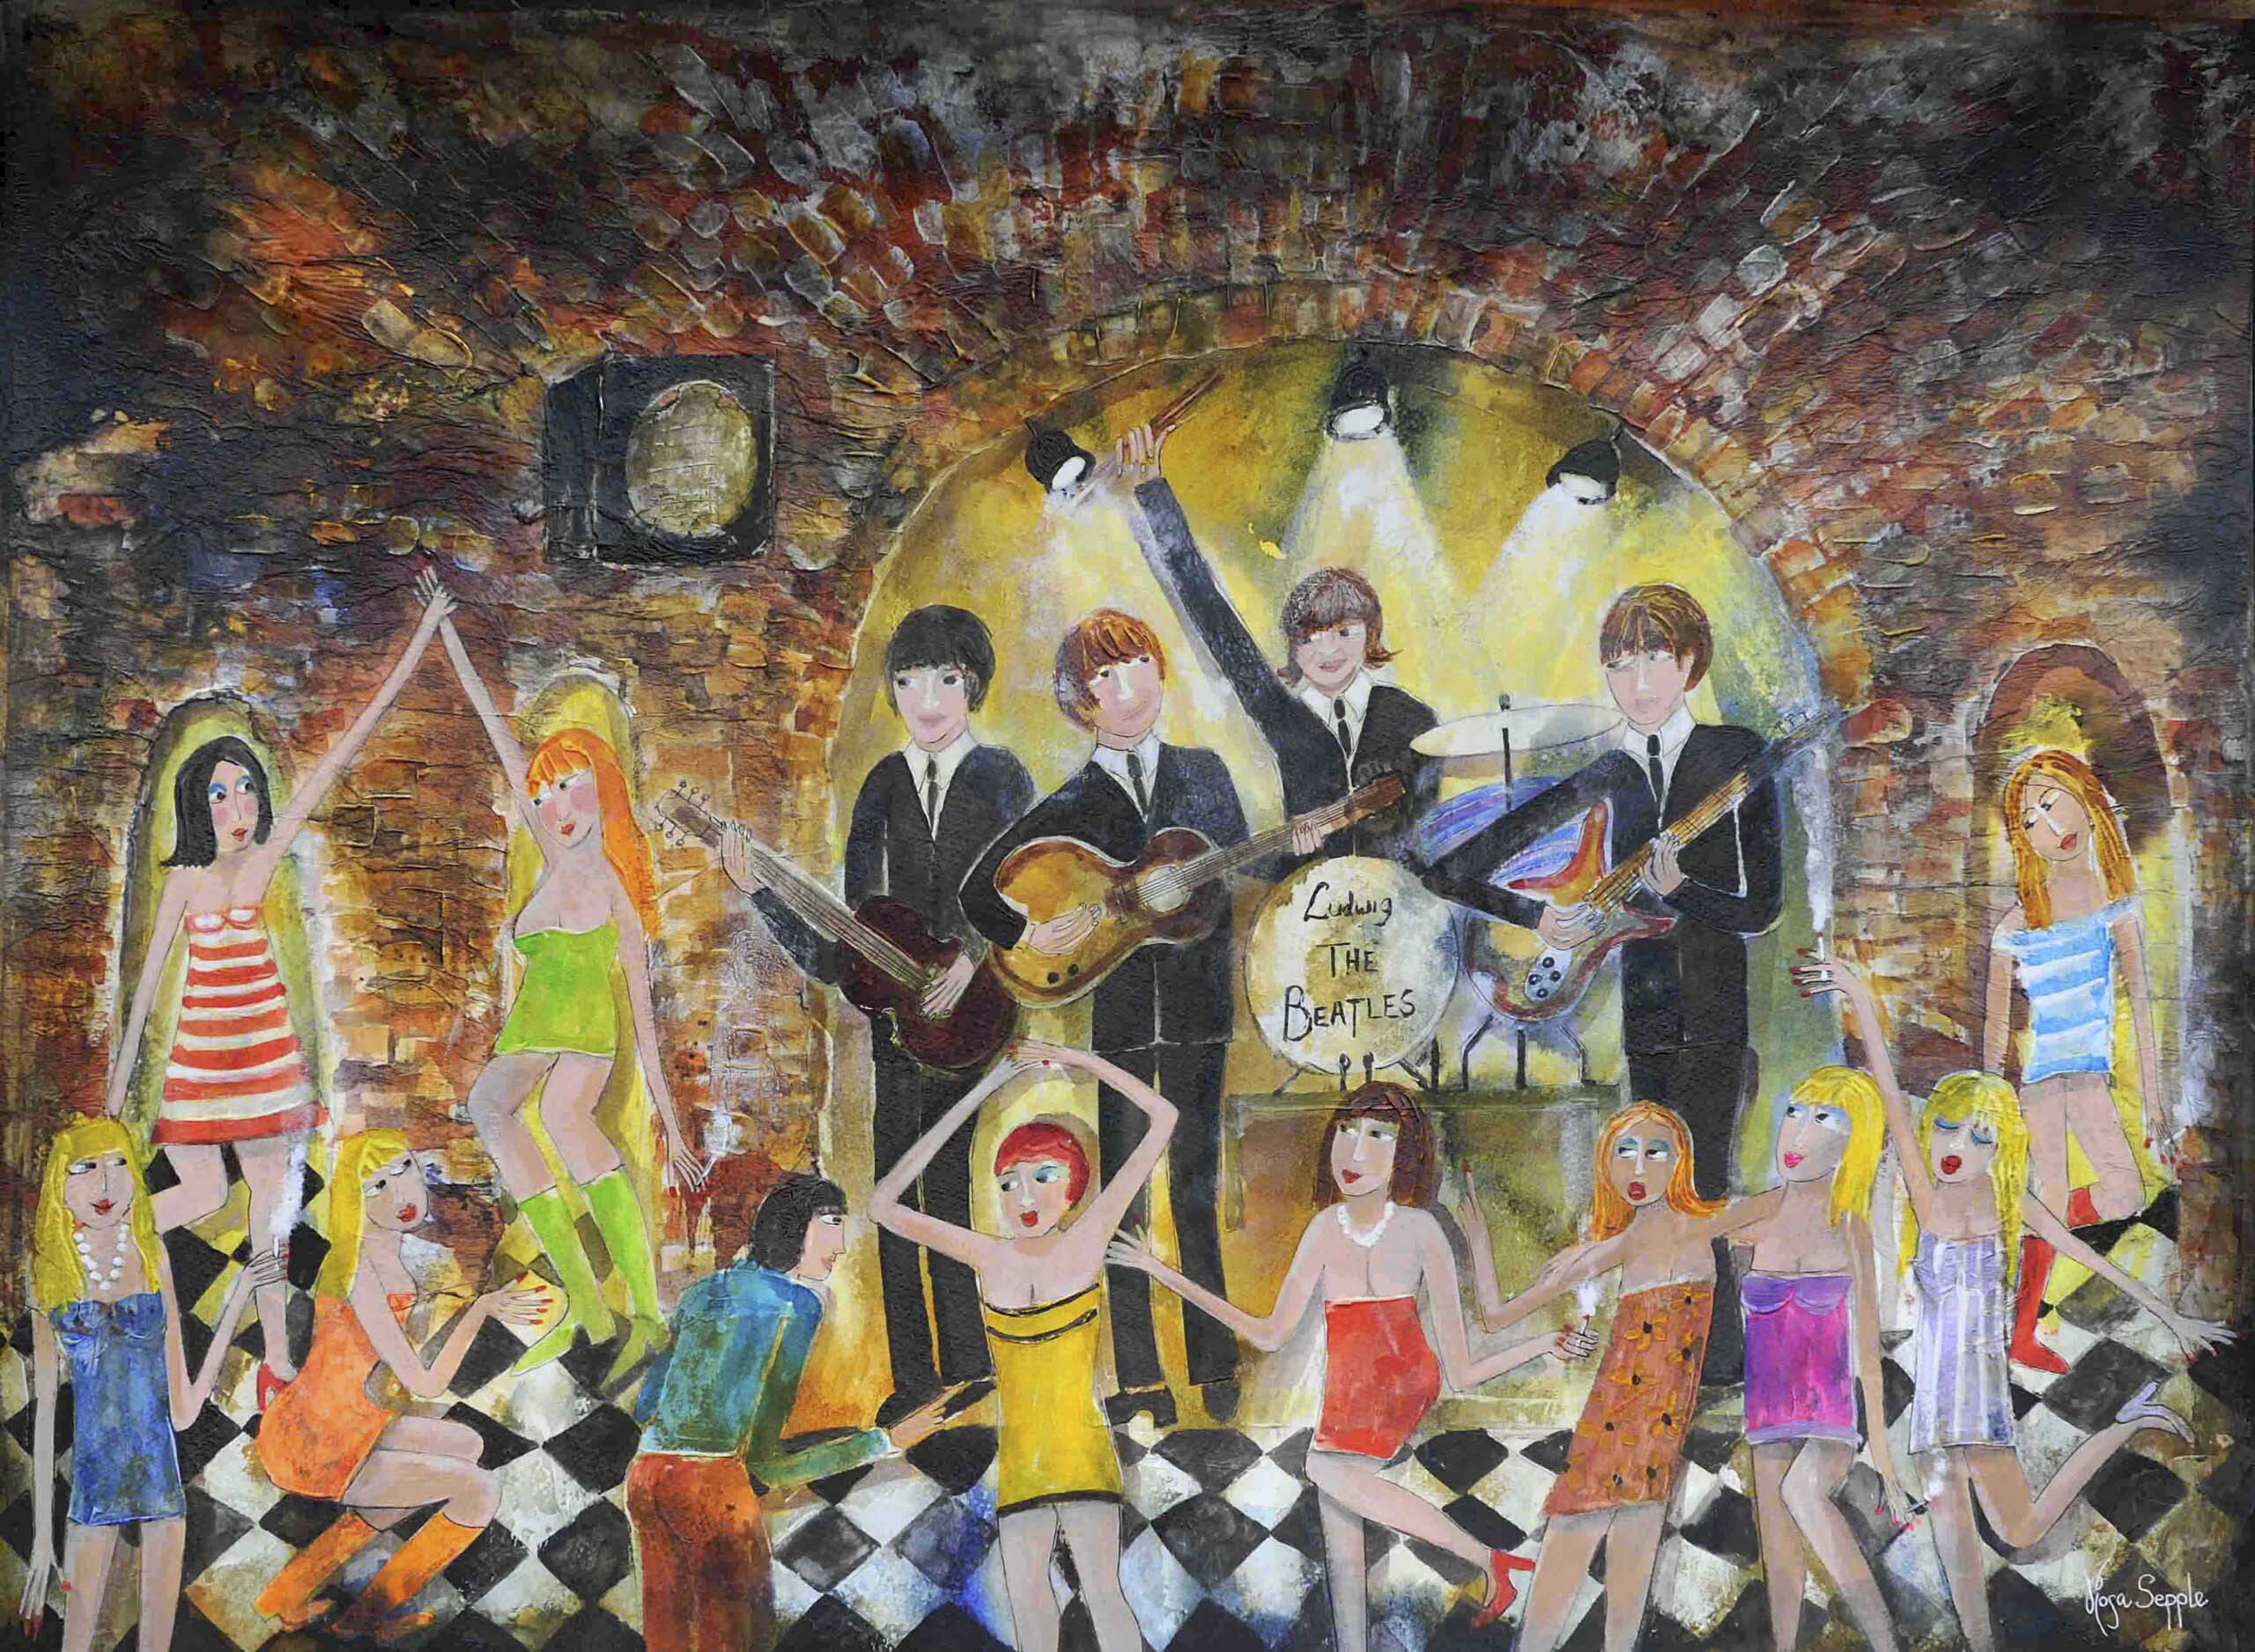 The Fab Four by Rosa Sepple at Adrian Hill Fine Art.